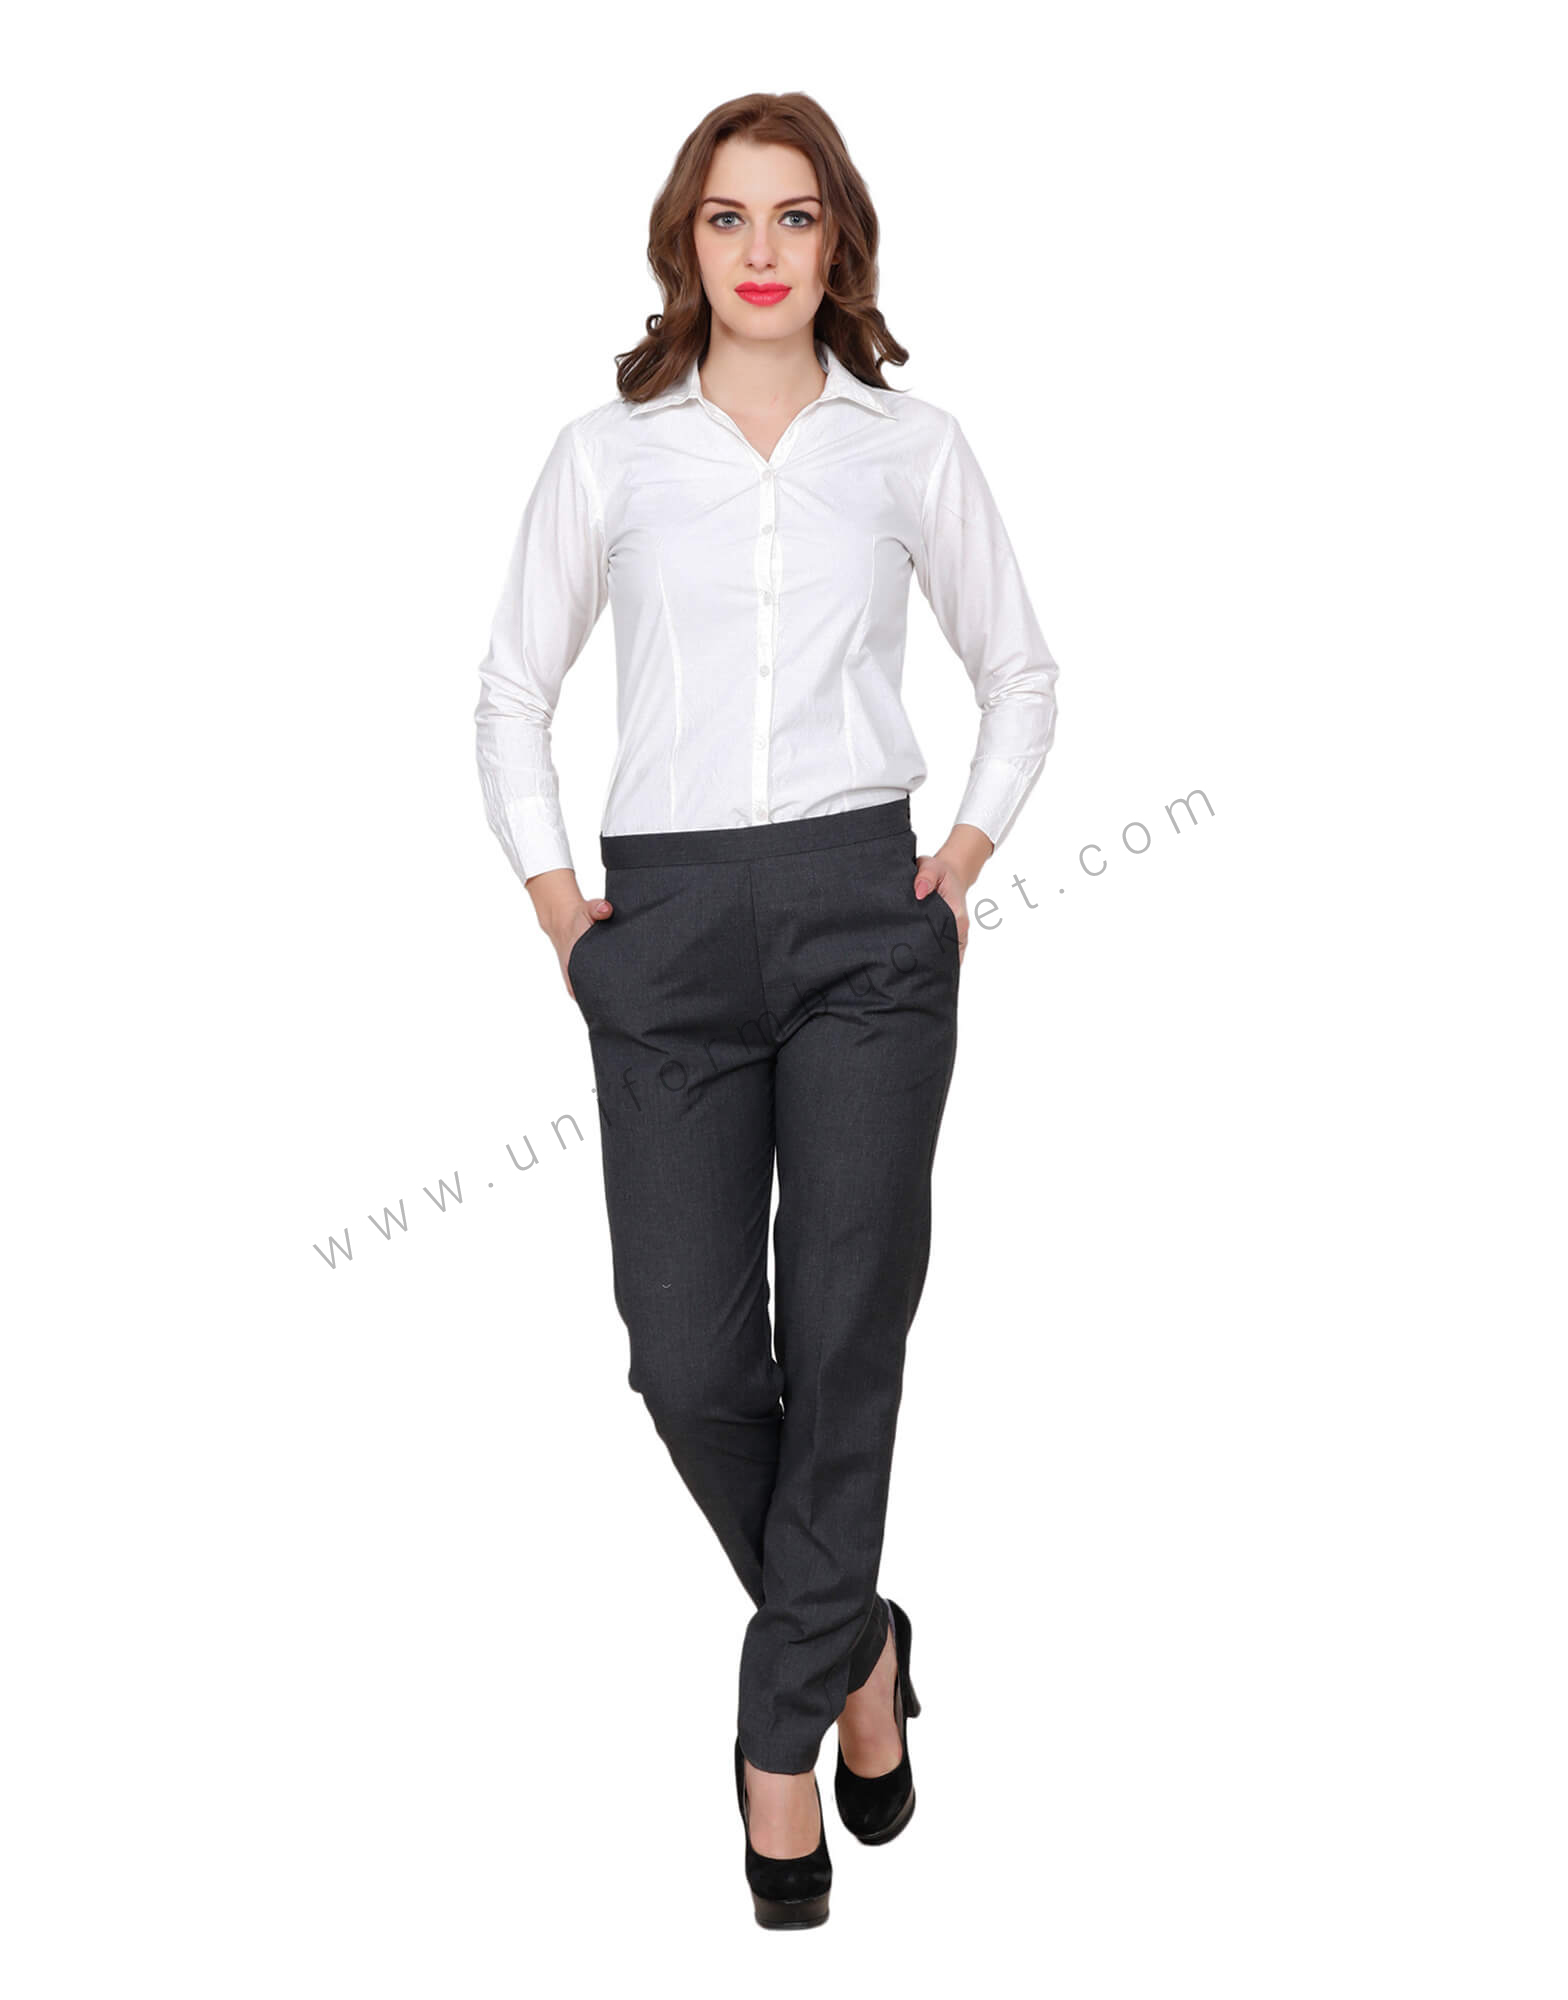 Go Colors Women Solid Black Formal Trousers 2XL 2XL Buy Go Colors Women  Solid Black Formal Trousers 2XL 2XL Online at Best Price in India   Nykaa